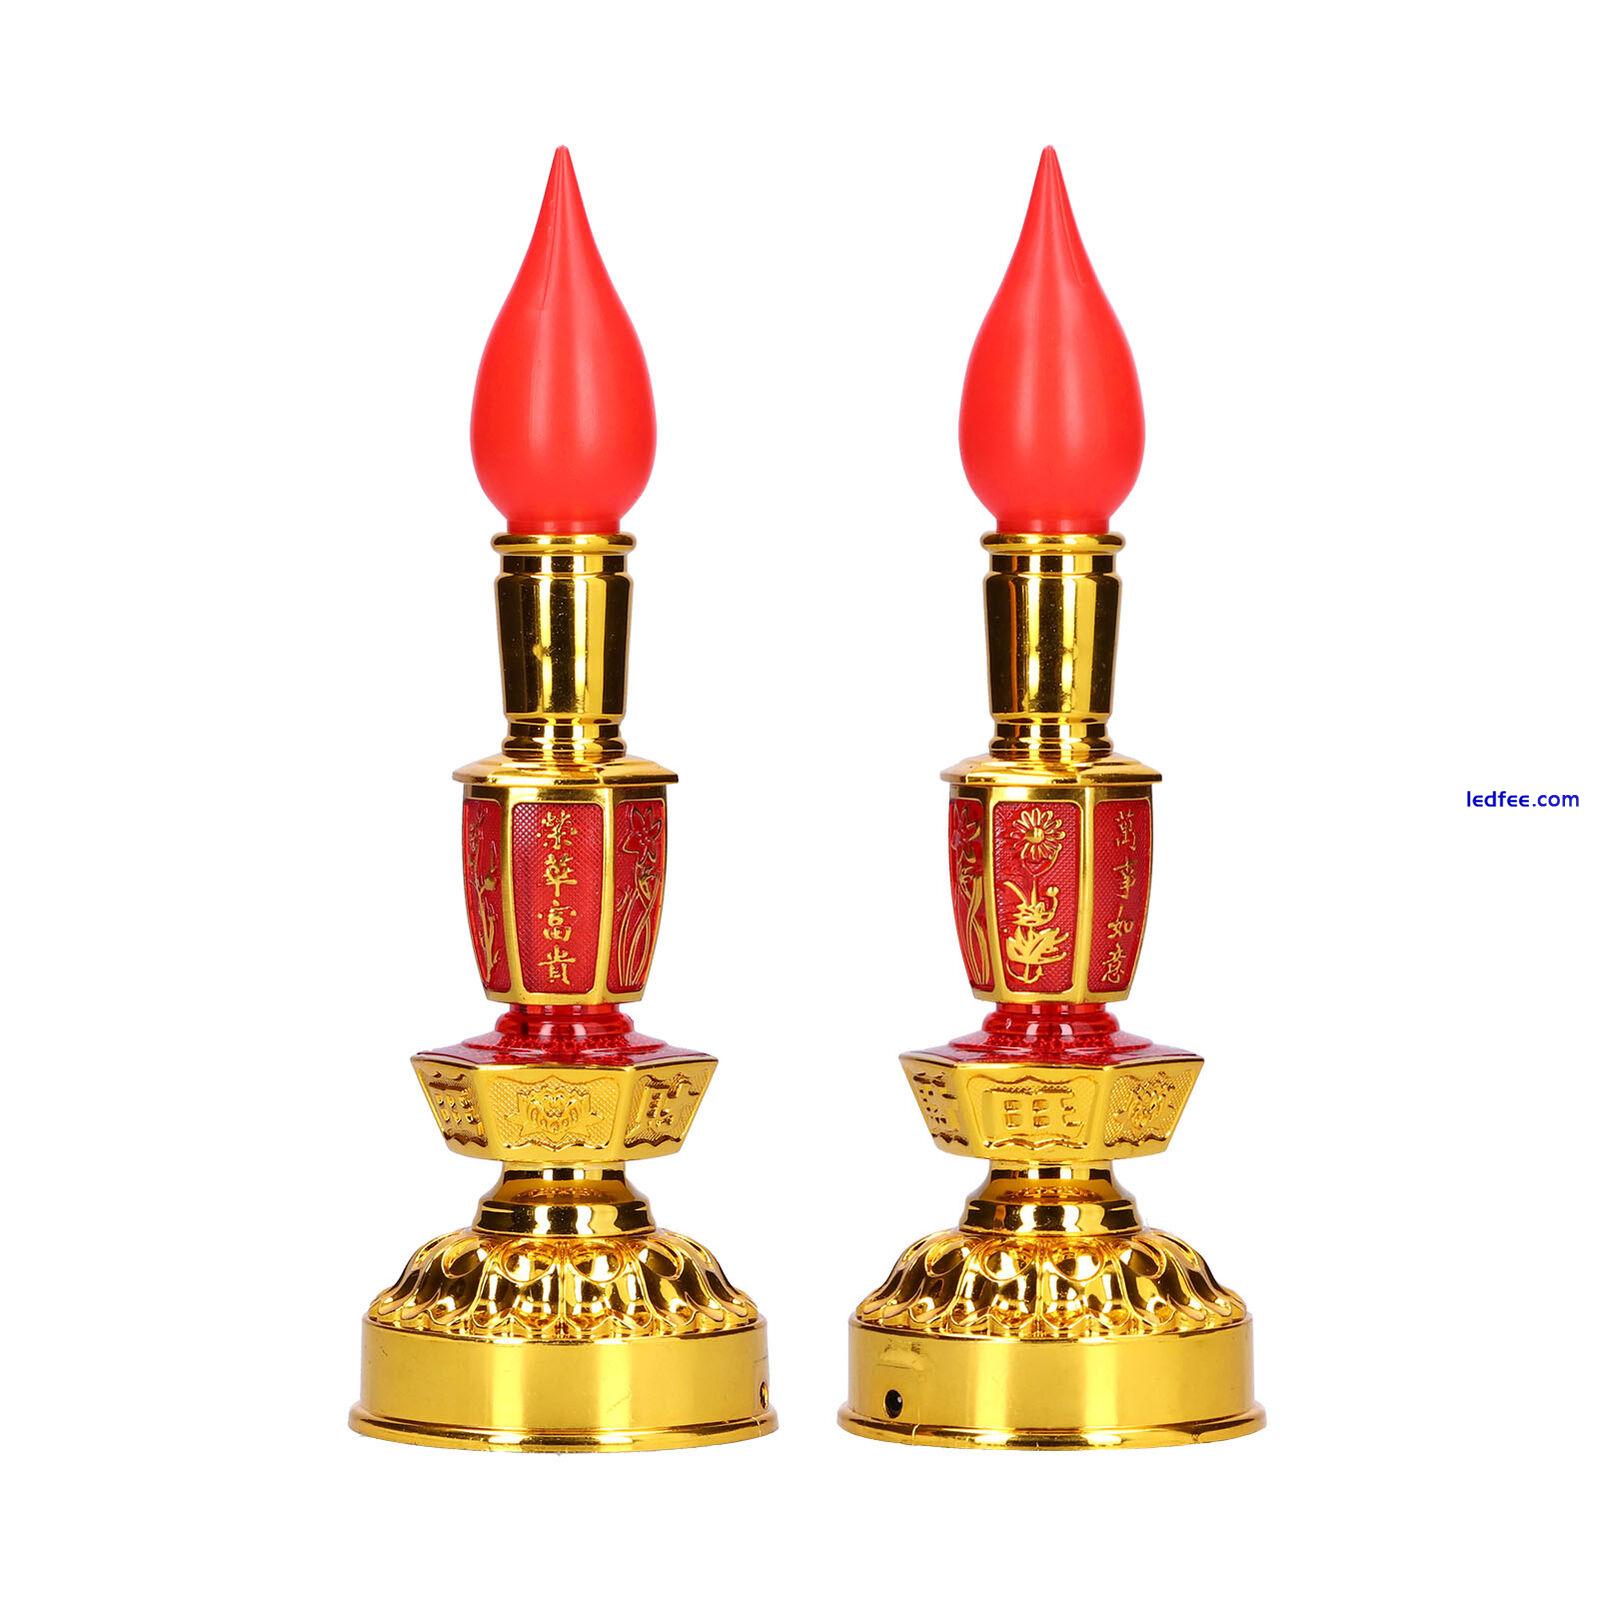 (Double Bright Electric Candle)Candle Lamp Flower Buddhist Light LED MG DG 4 